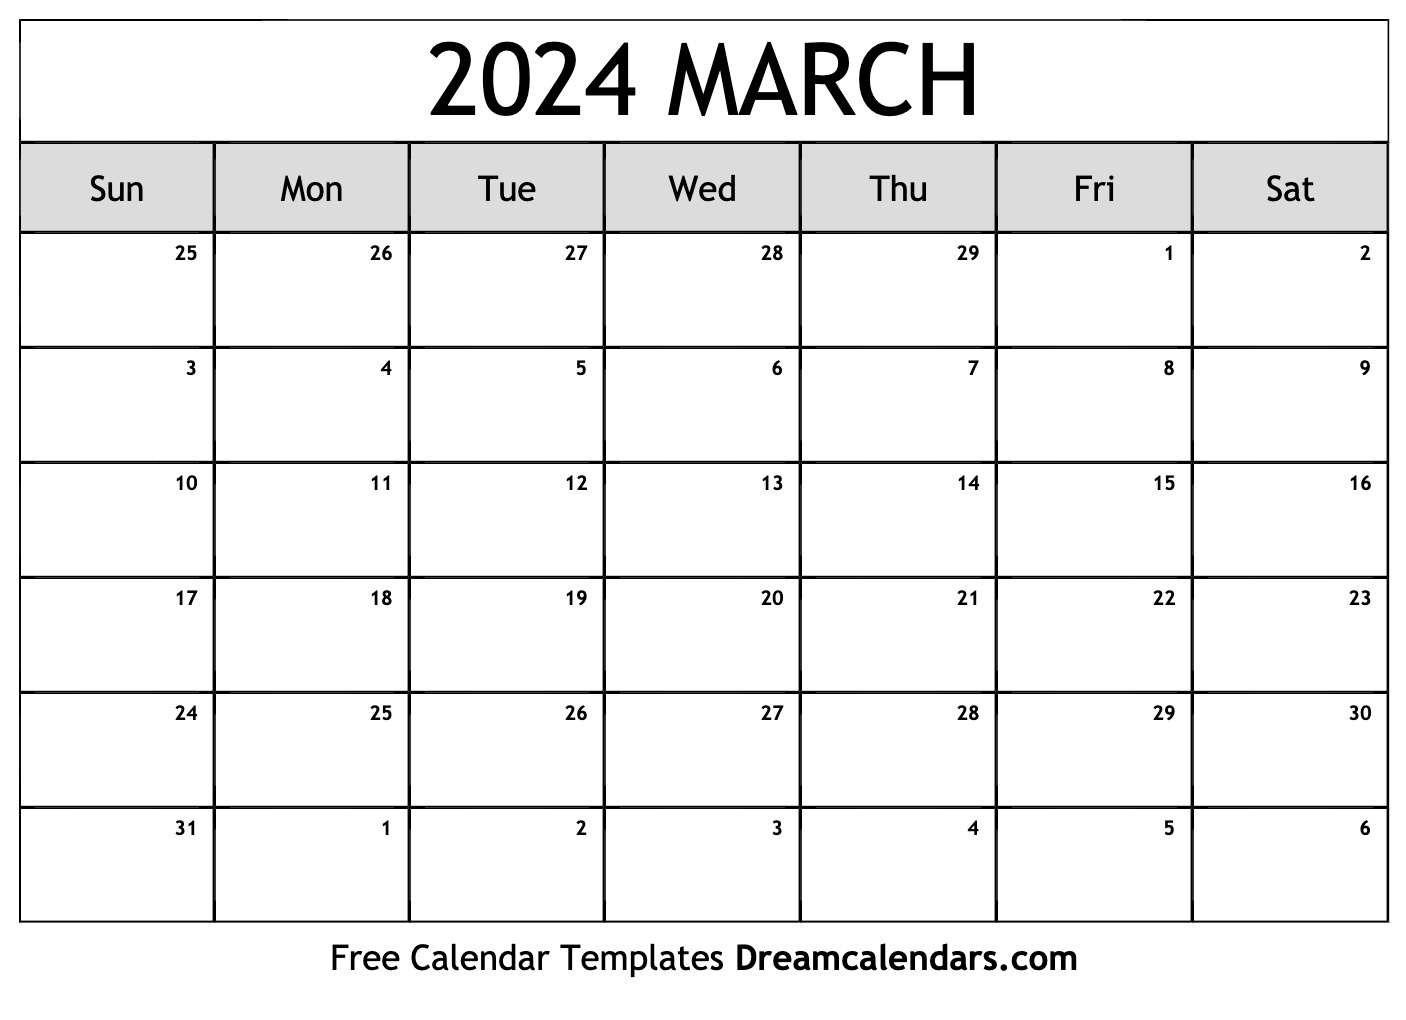 March 2024 Calendar | Free Blank Printable With Holidays for Blank March 2024 Calendar Free Printable